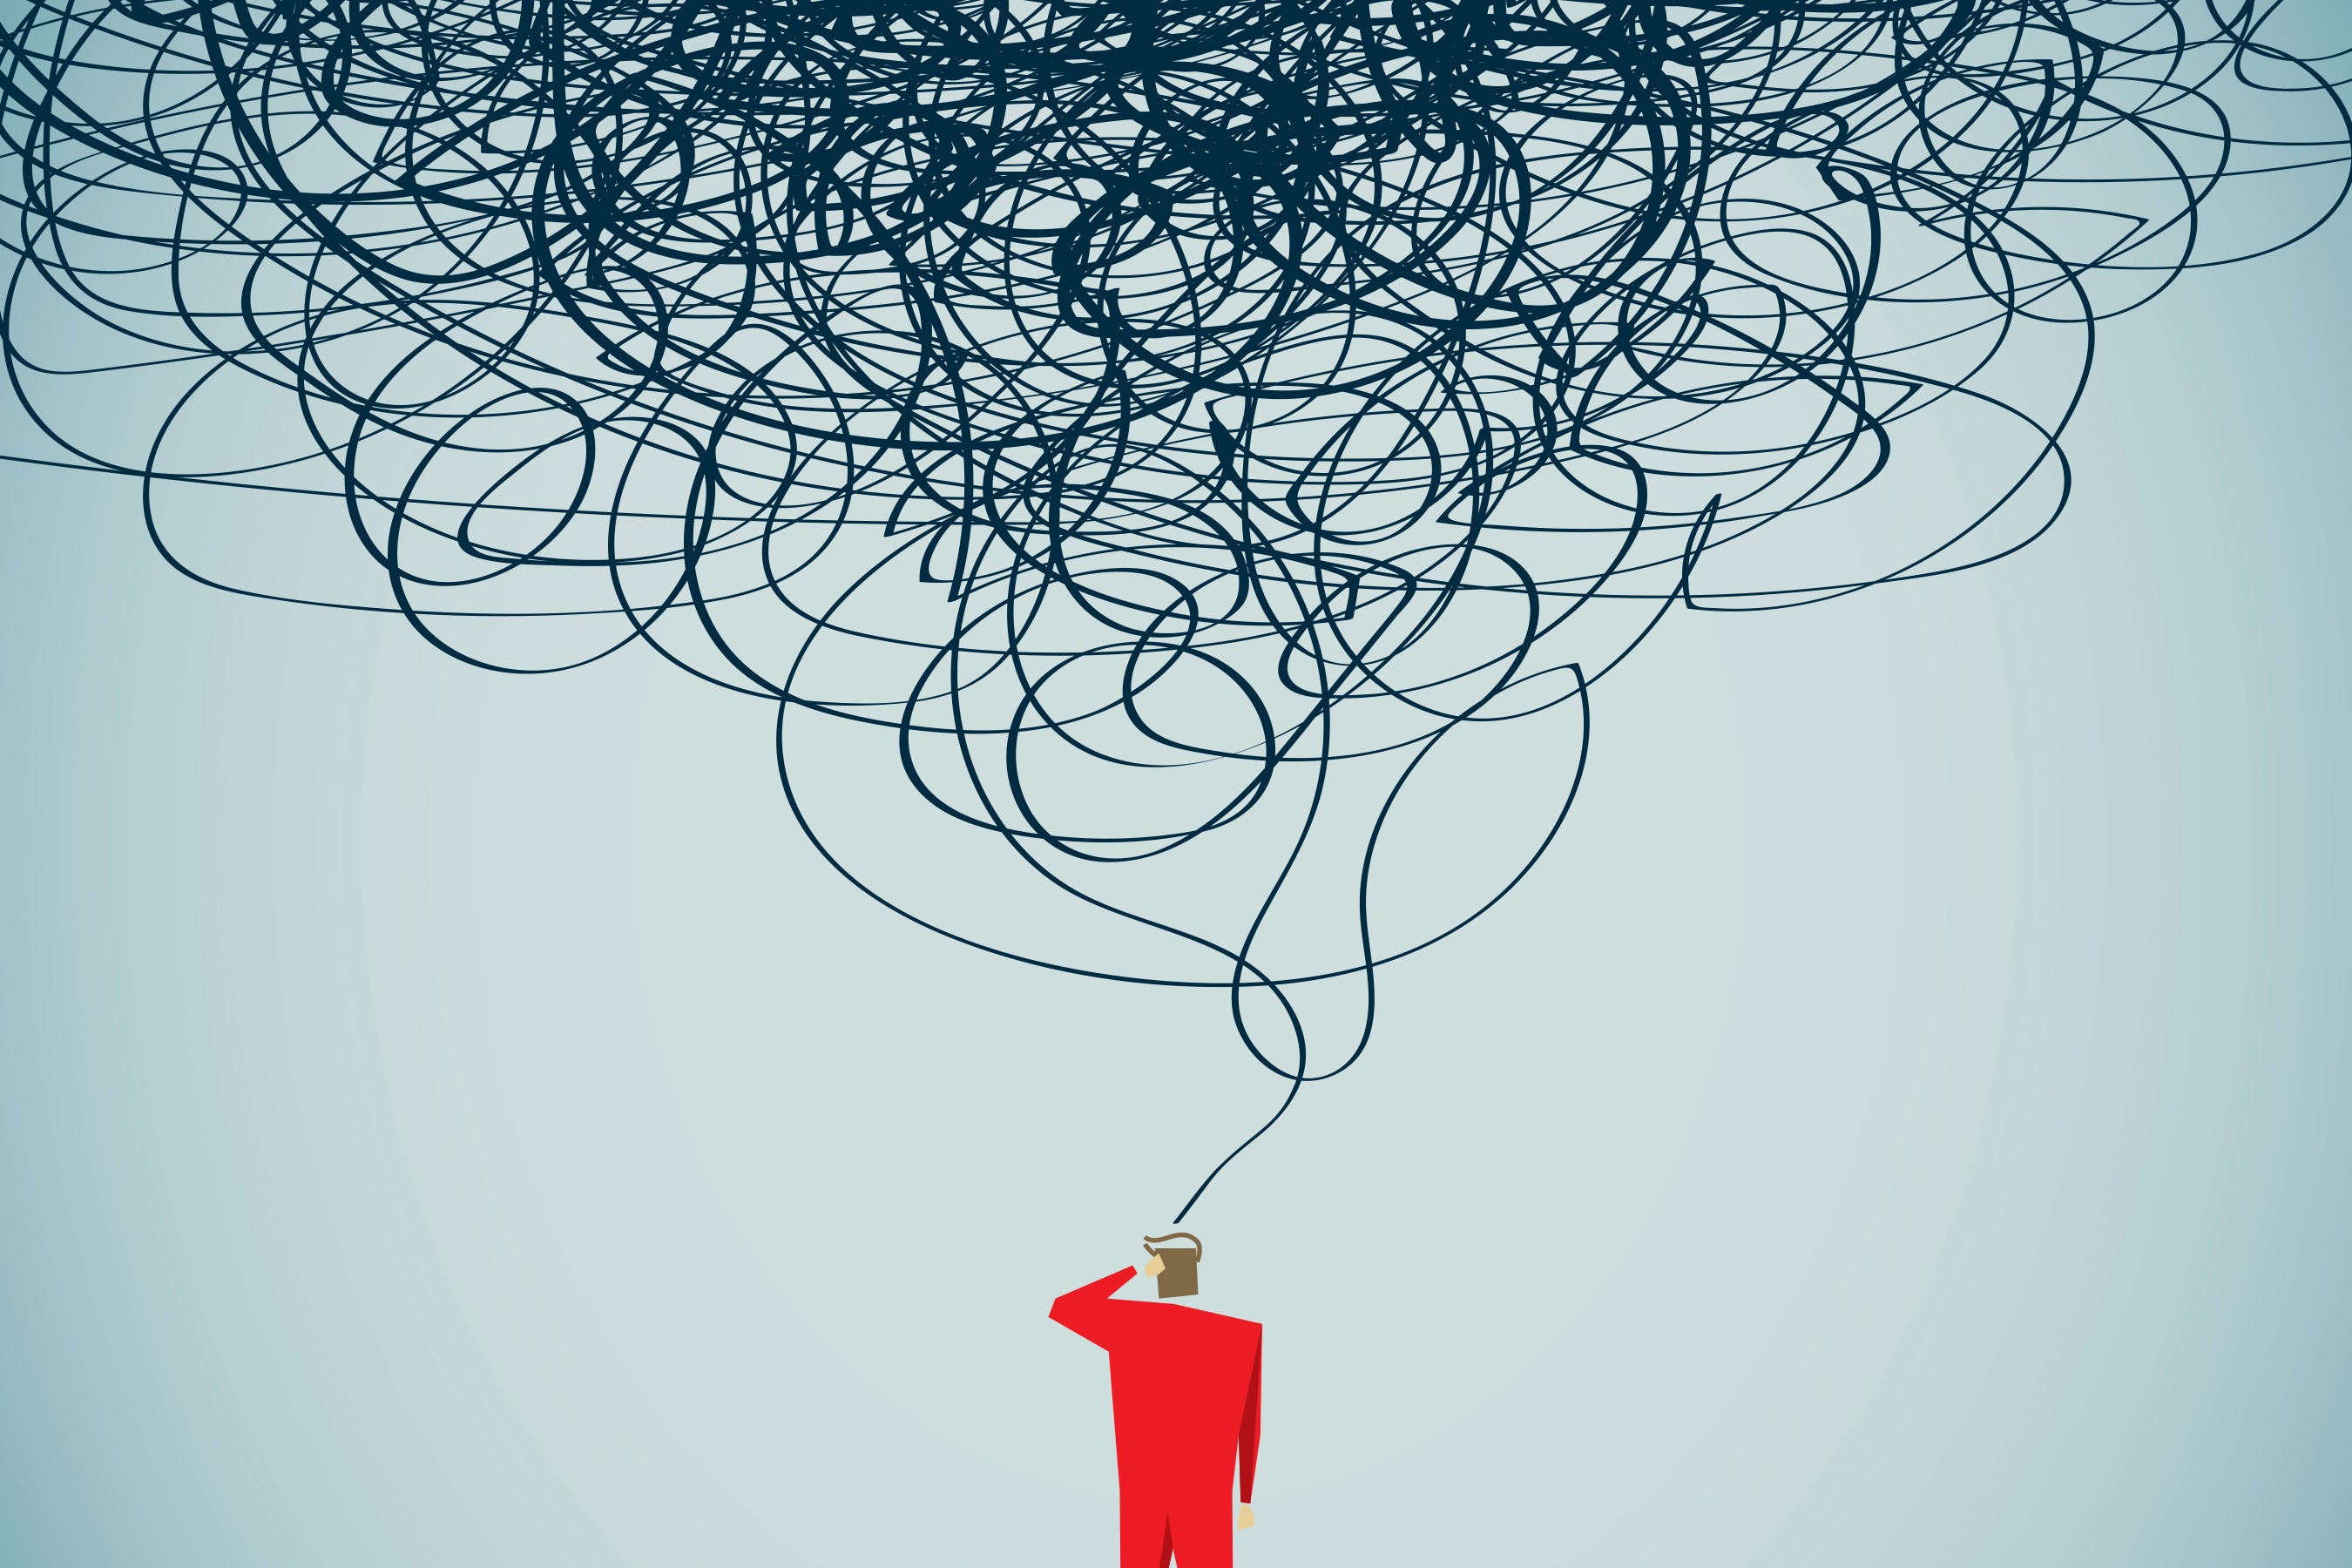 Illustration of person in red suit with cloud of confusing lines above.